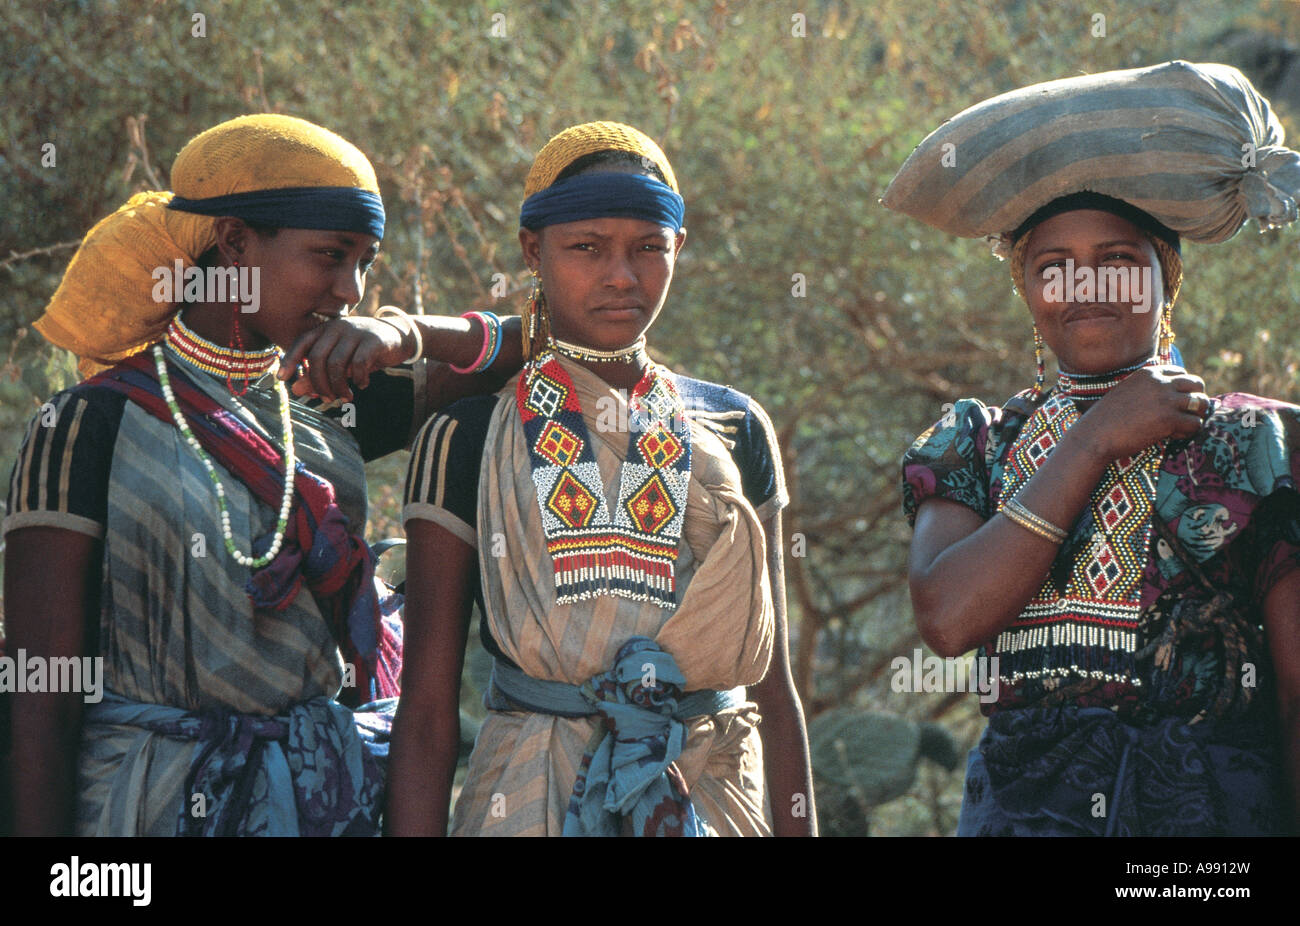 Young women in traditional dress going to market Harer Ethiopia Stock Photo